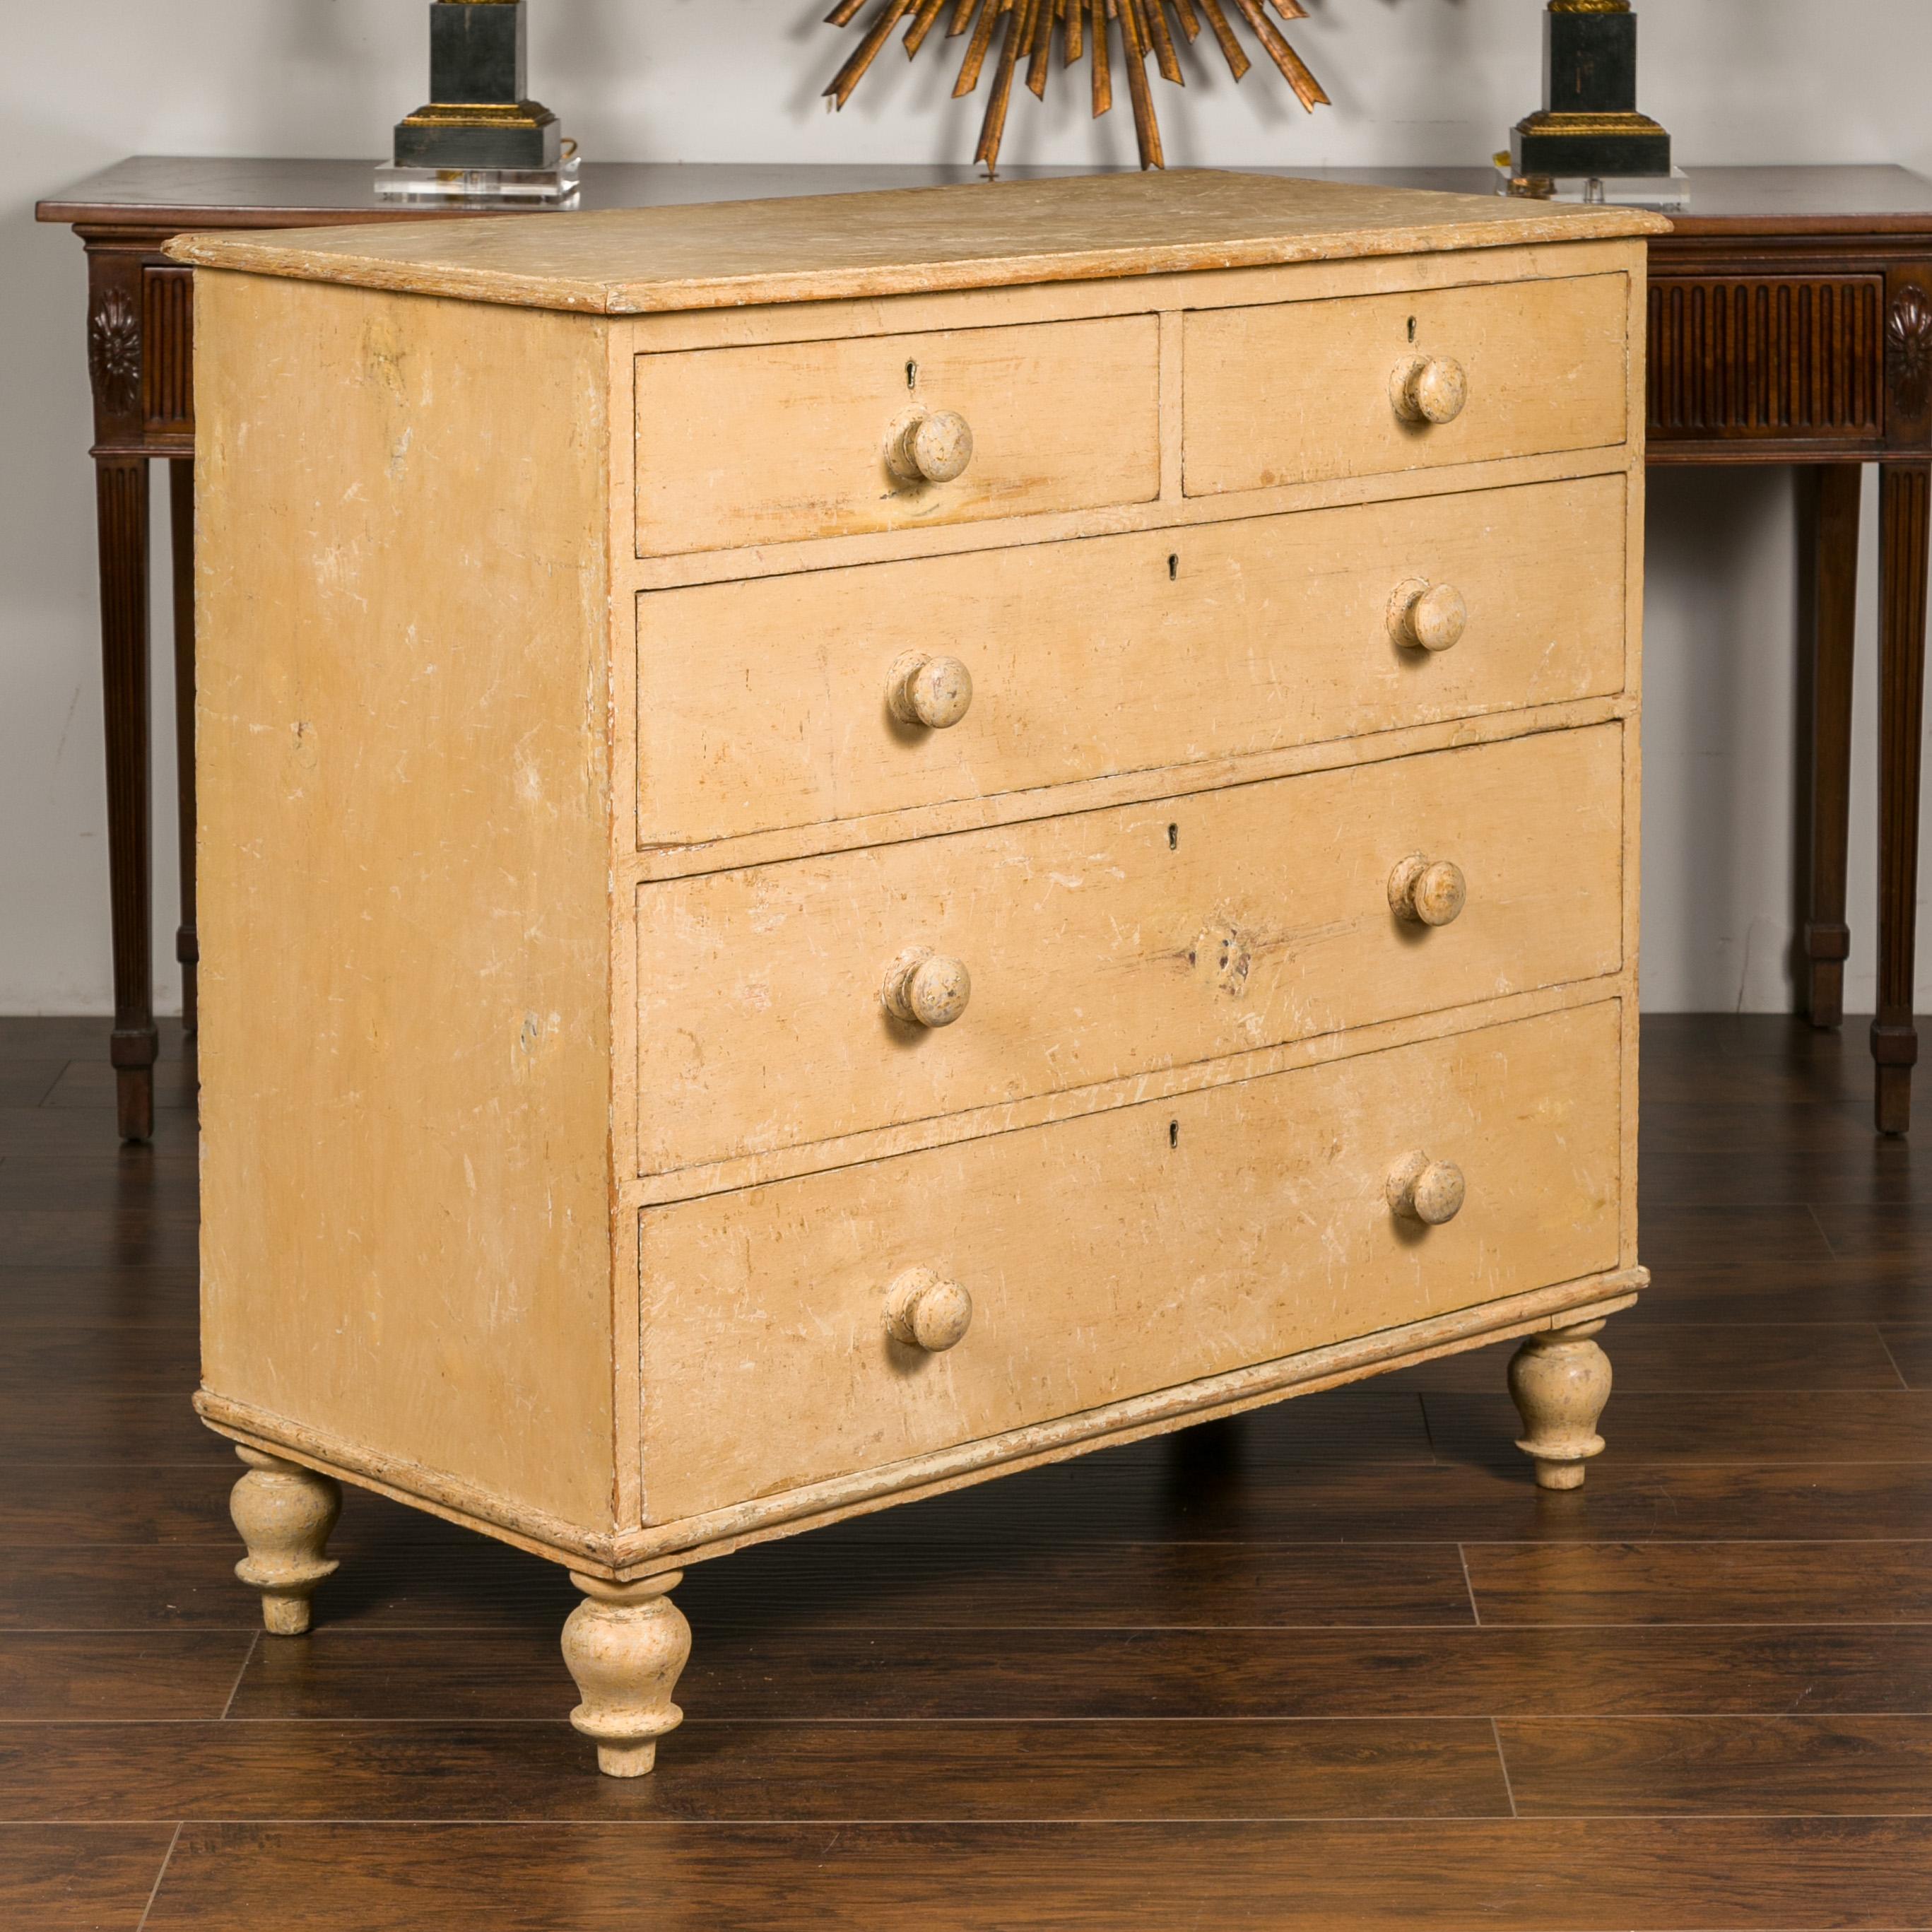 English 1860s Painted Wood Five-Drawer Chest with Turnip Feet and Wooden Pulls For Sale 6